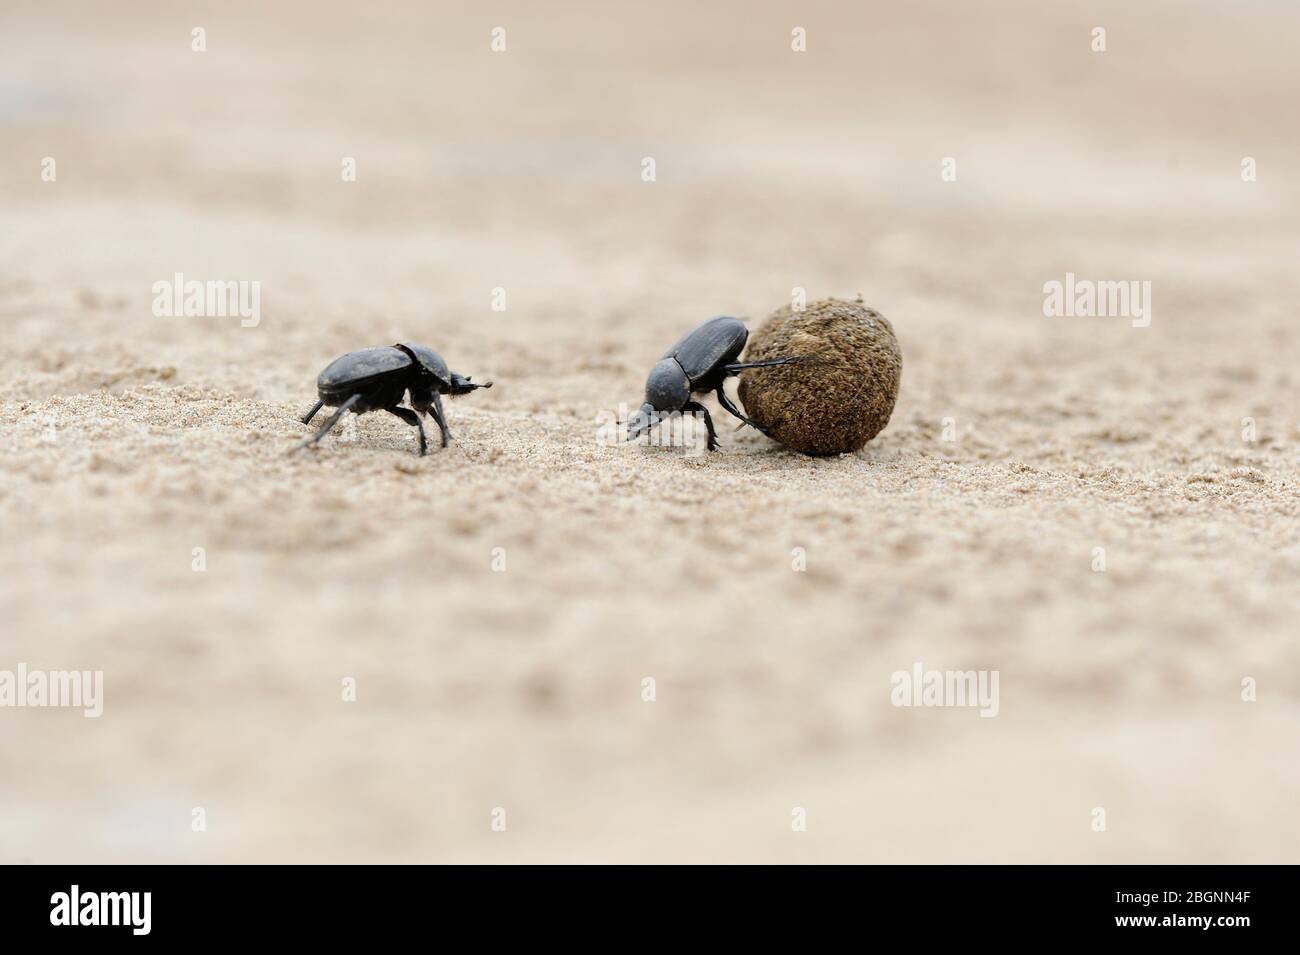 dung beetles on beach sand fighting for ball Stock Photo